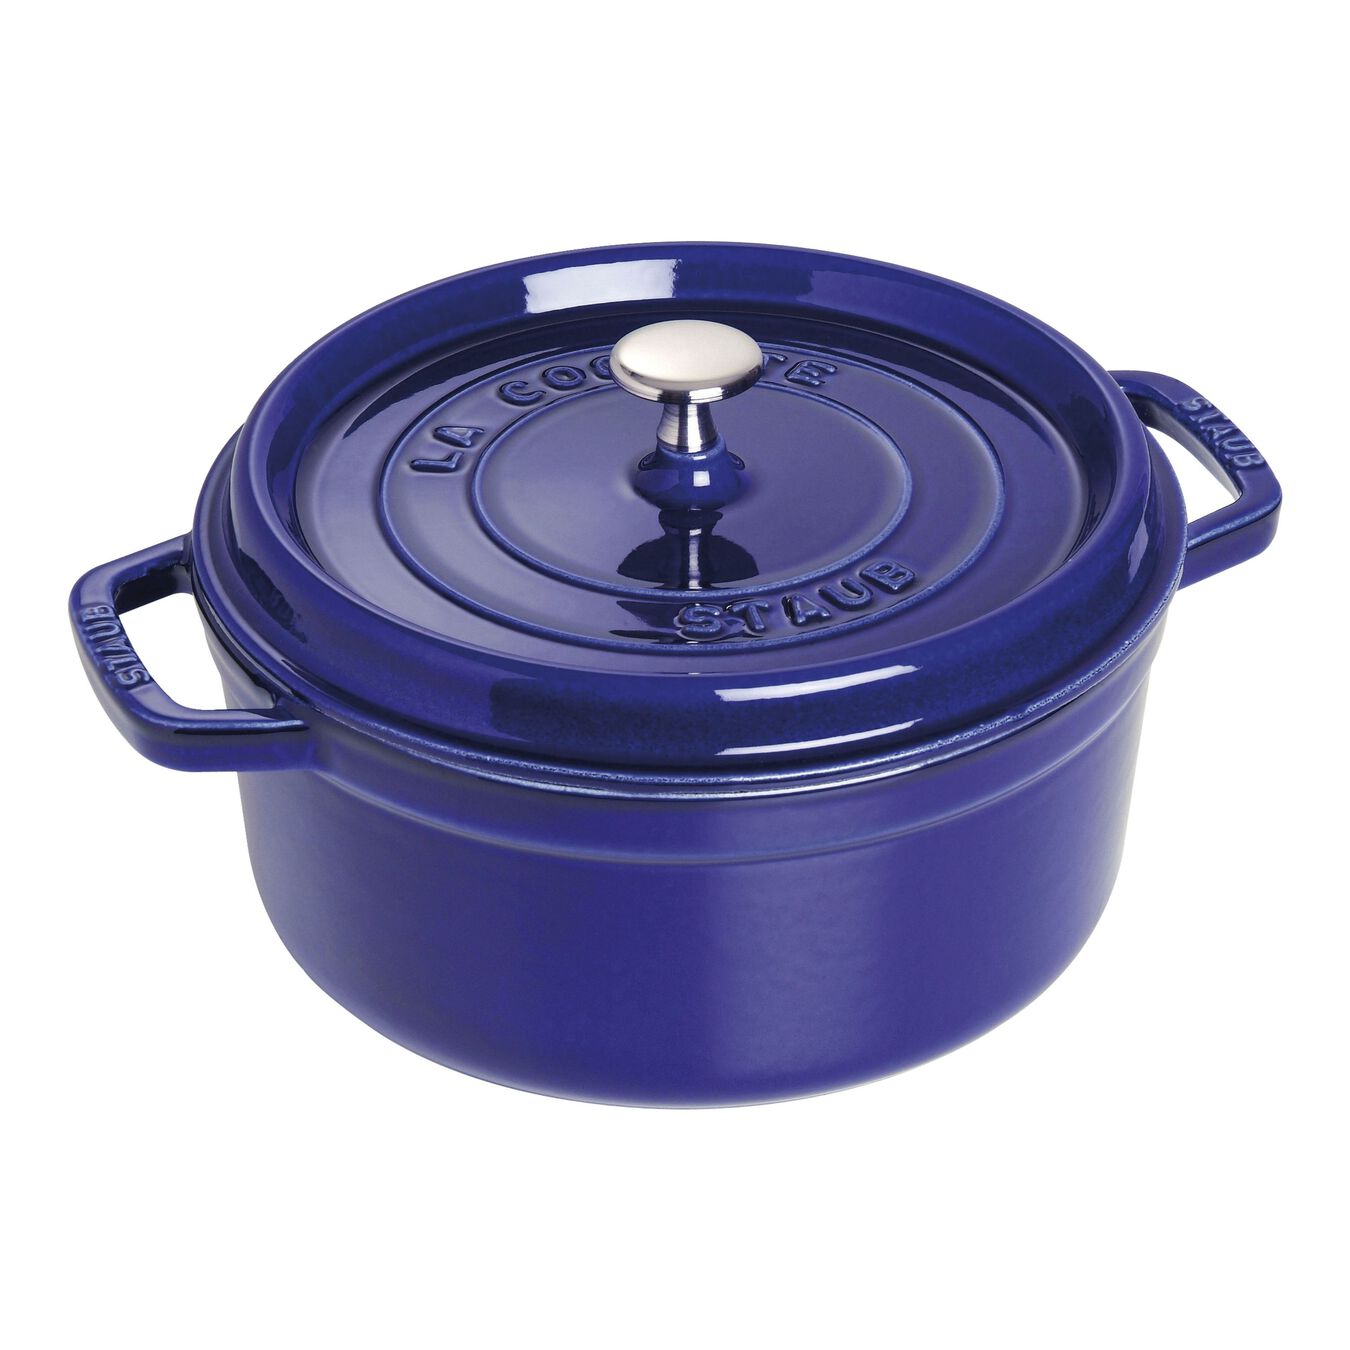 5.25 l cast iron round Cocotte, dark-blue - Visual Imperfections,,large 1